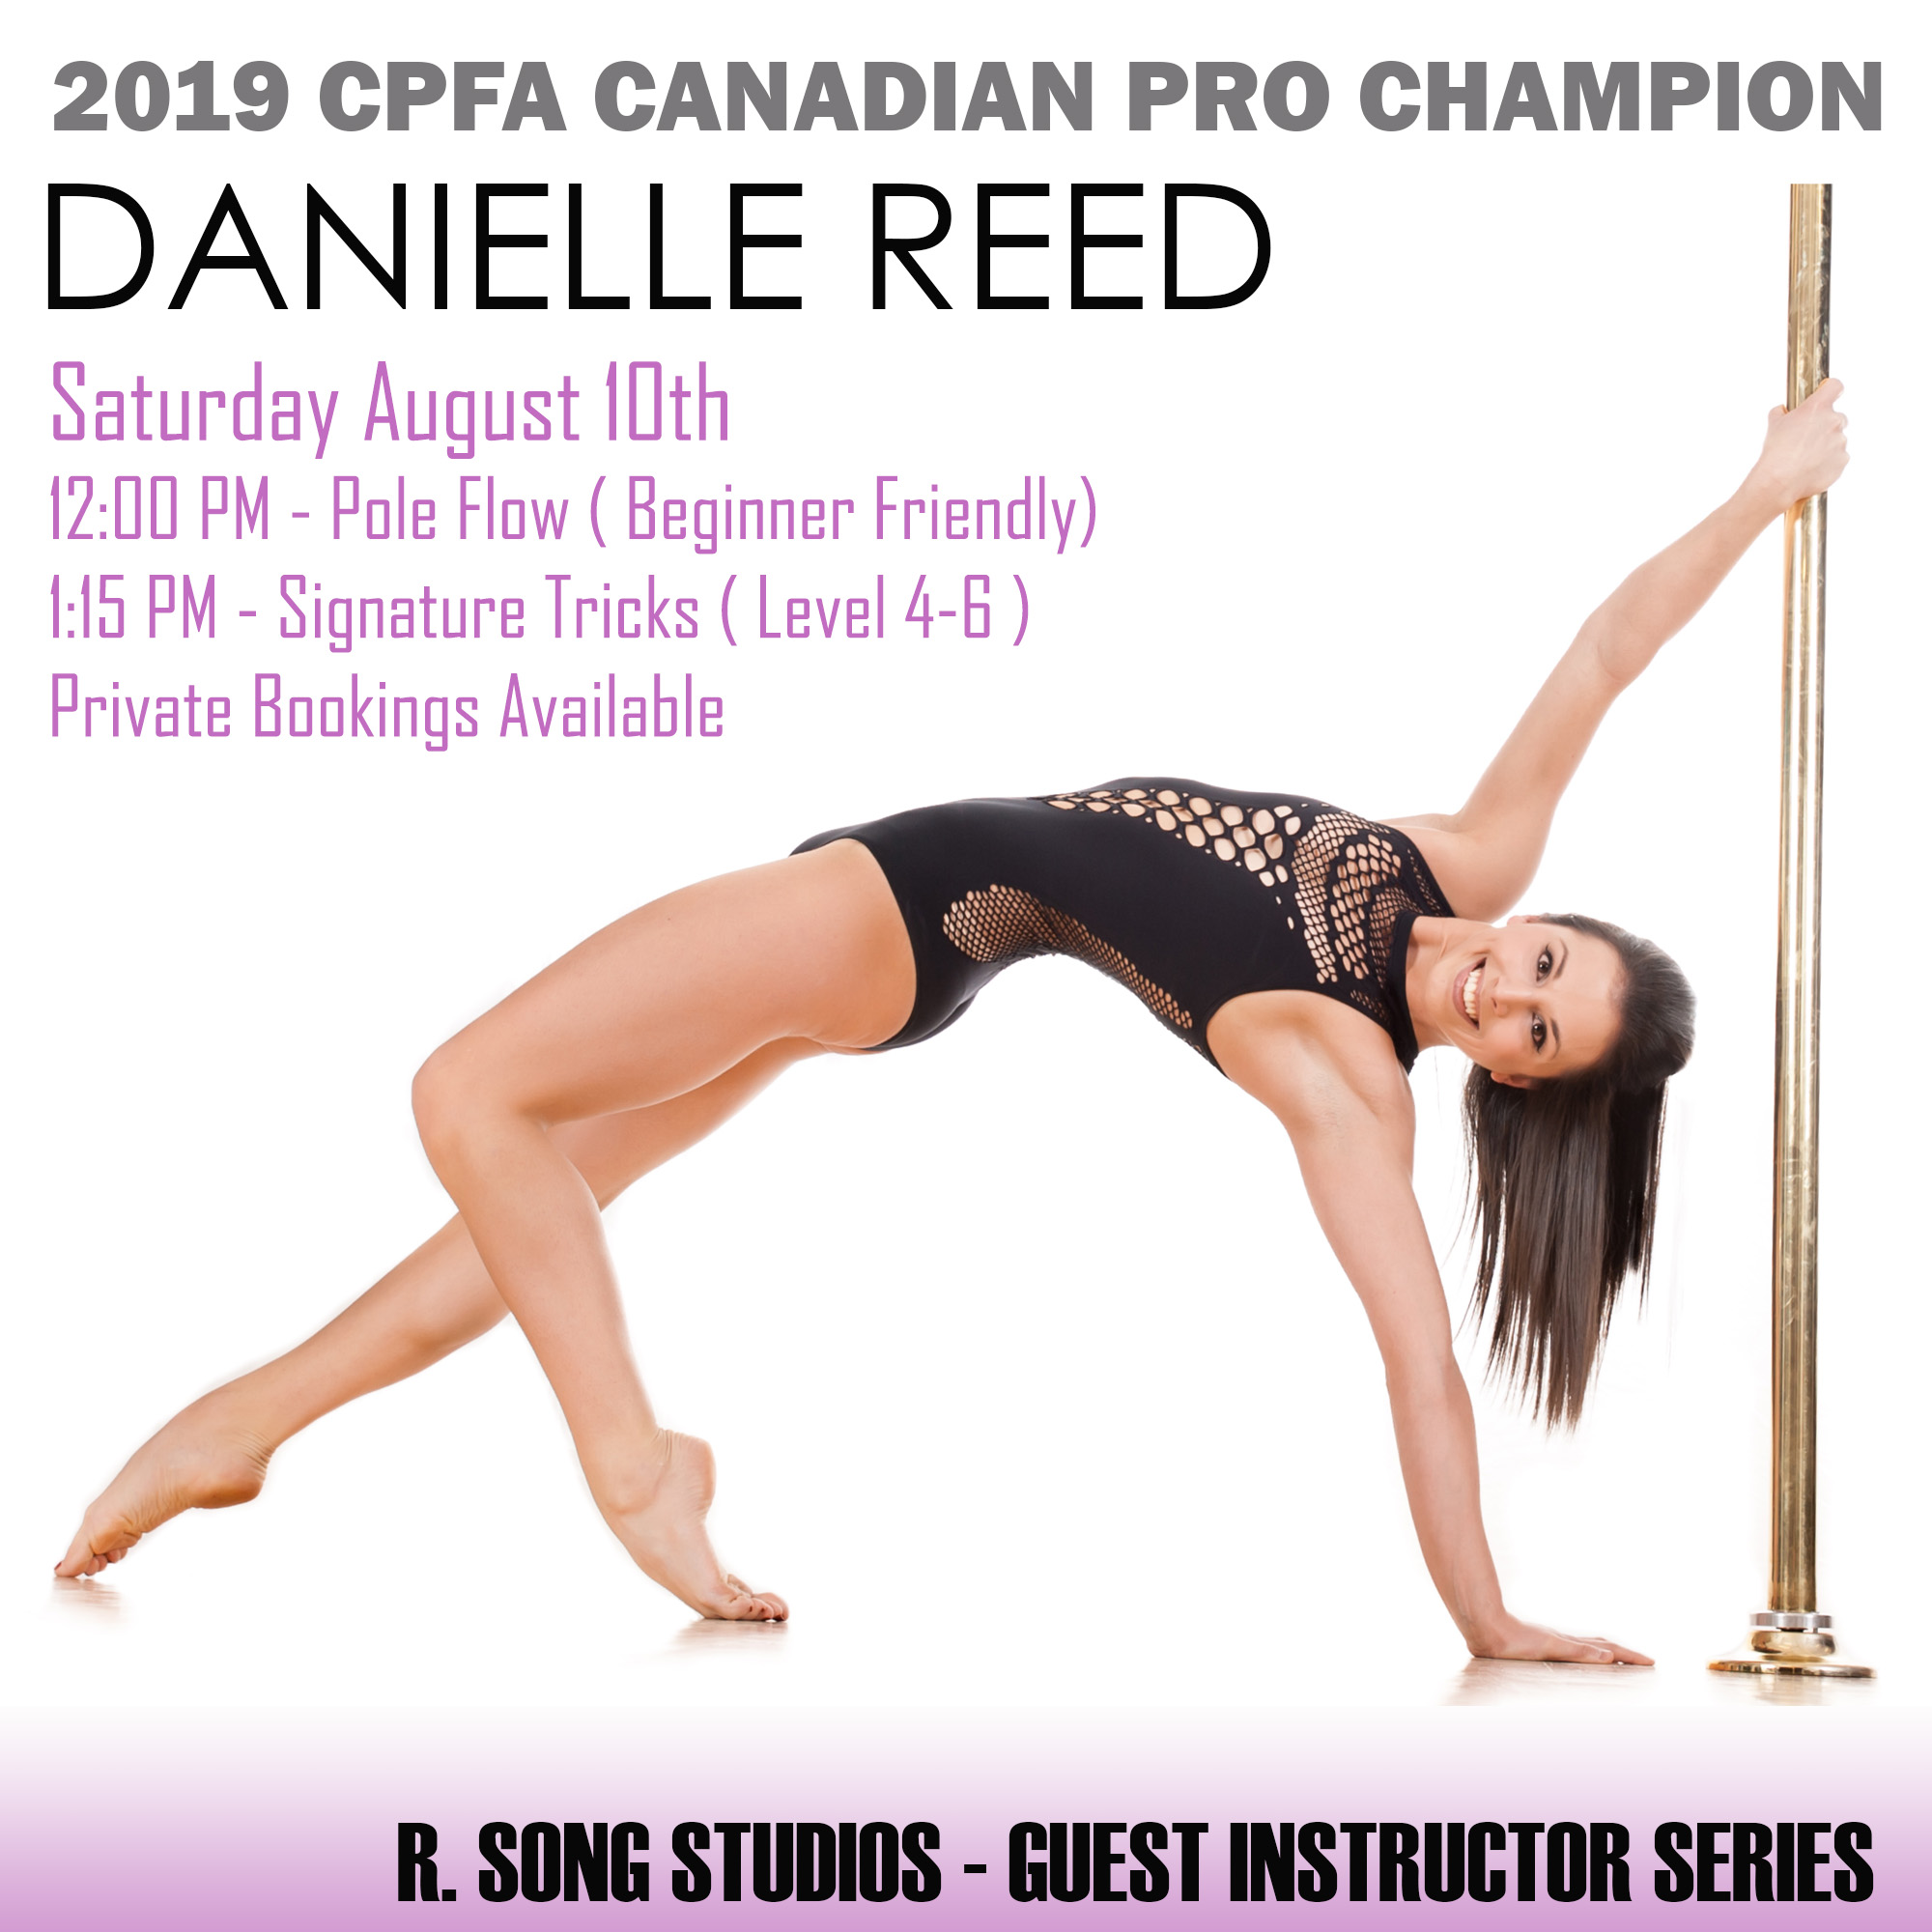 Danielle Reed Insta Poster